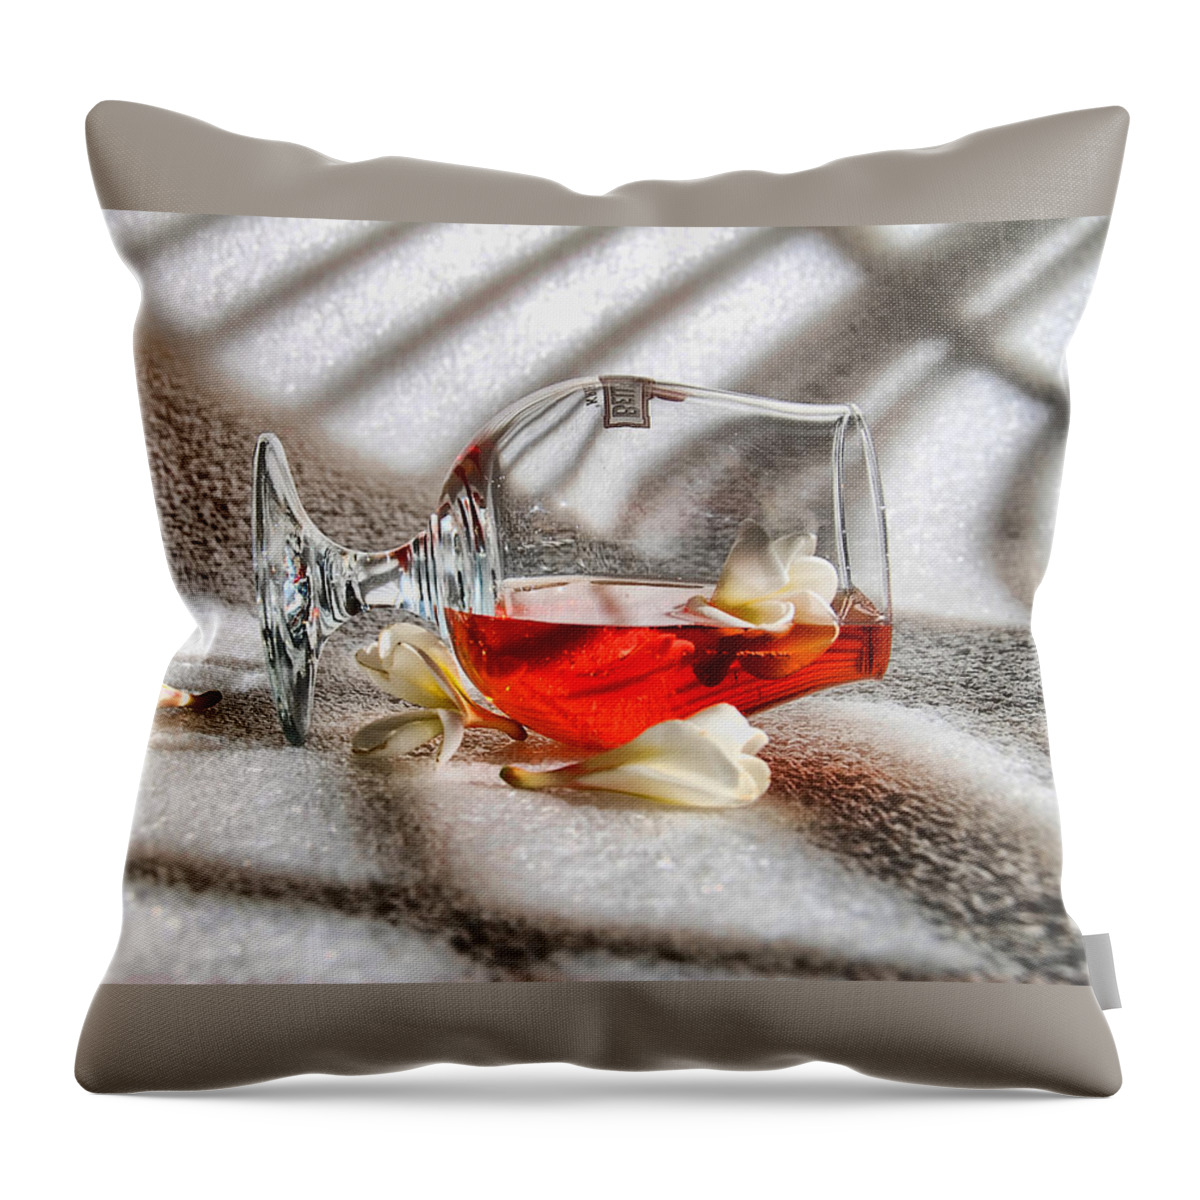 Campari Throw Pillow featuring the photograph Campari by Andrei SKY